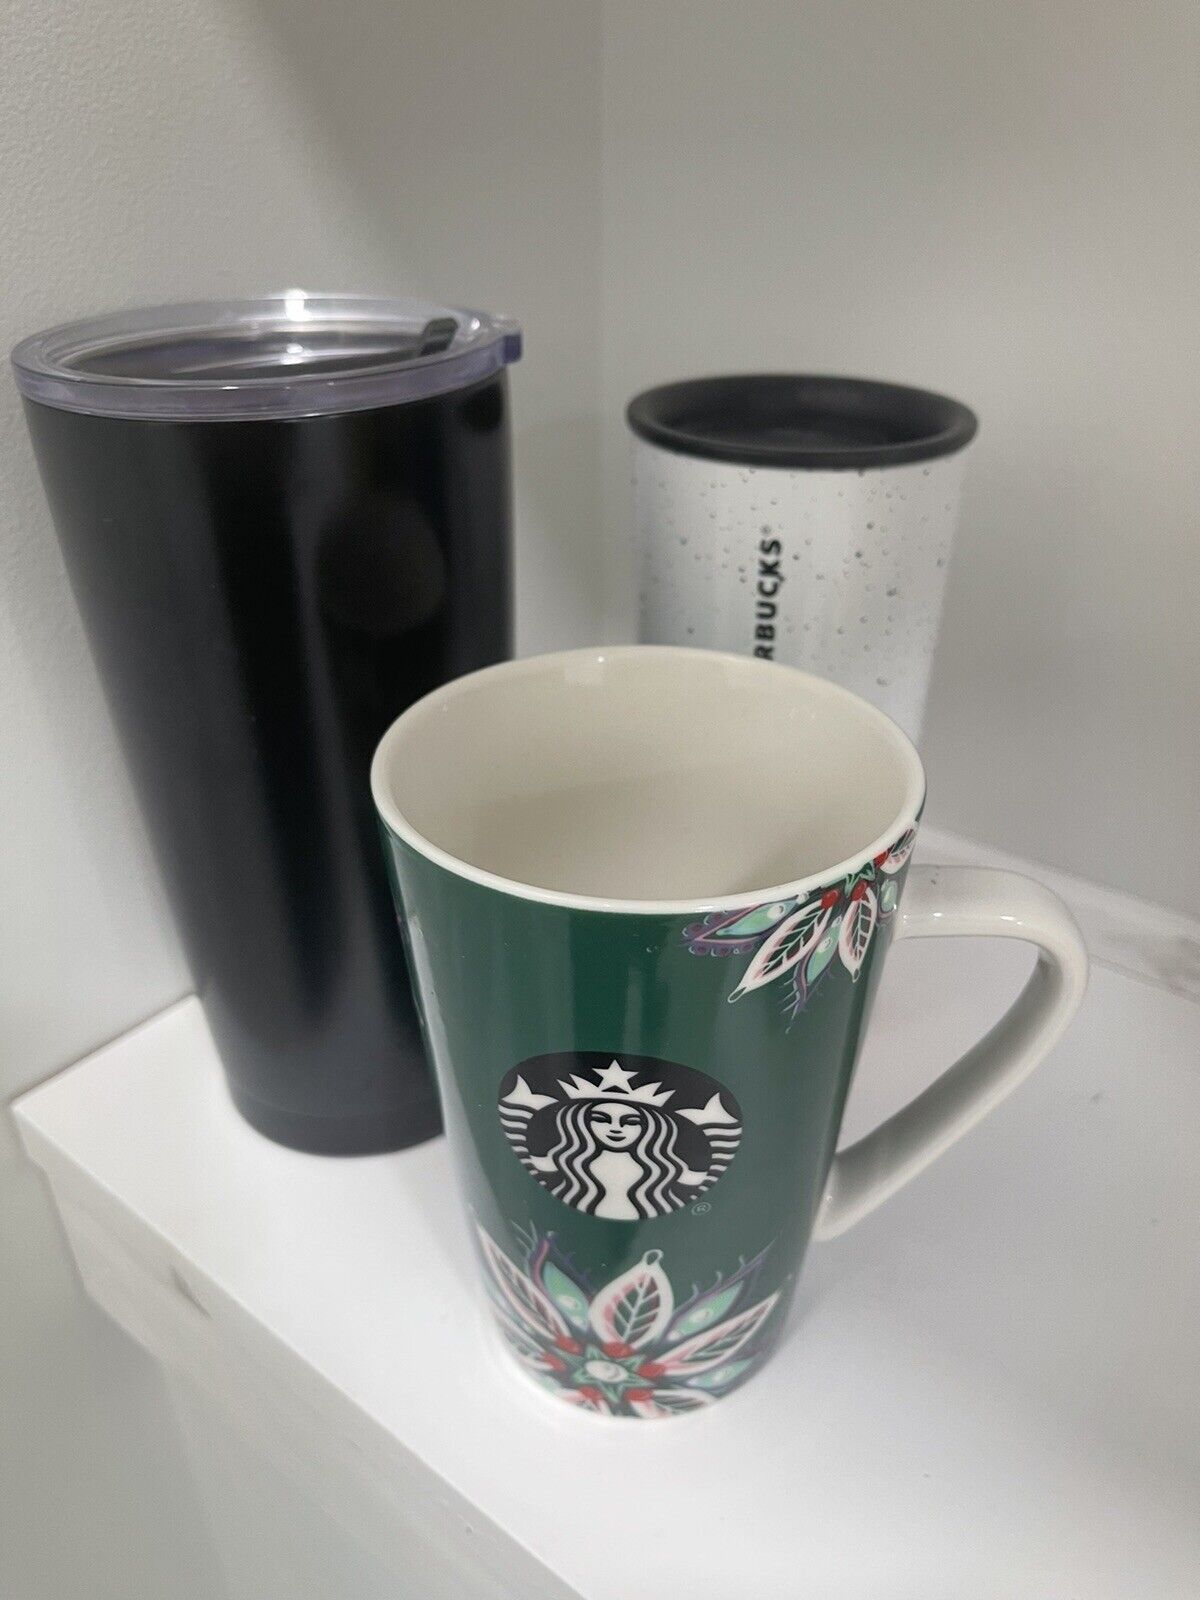 3x Starbucks Cups Tumblers Starbuck Travel Mugs LOT 3 USED Holiday